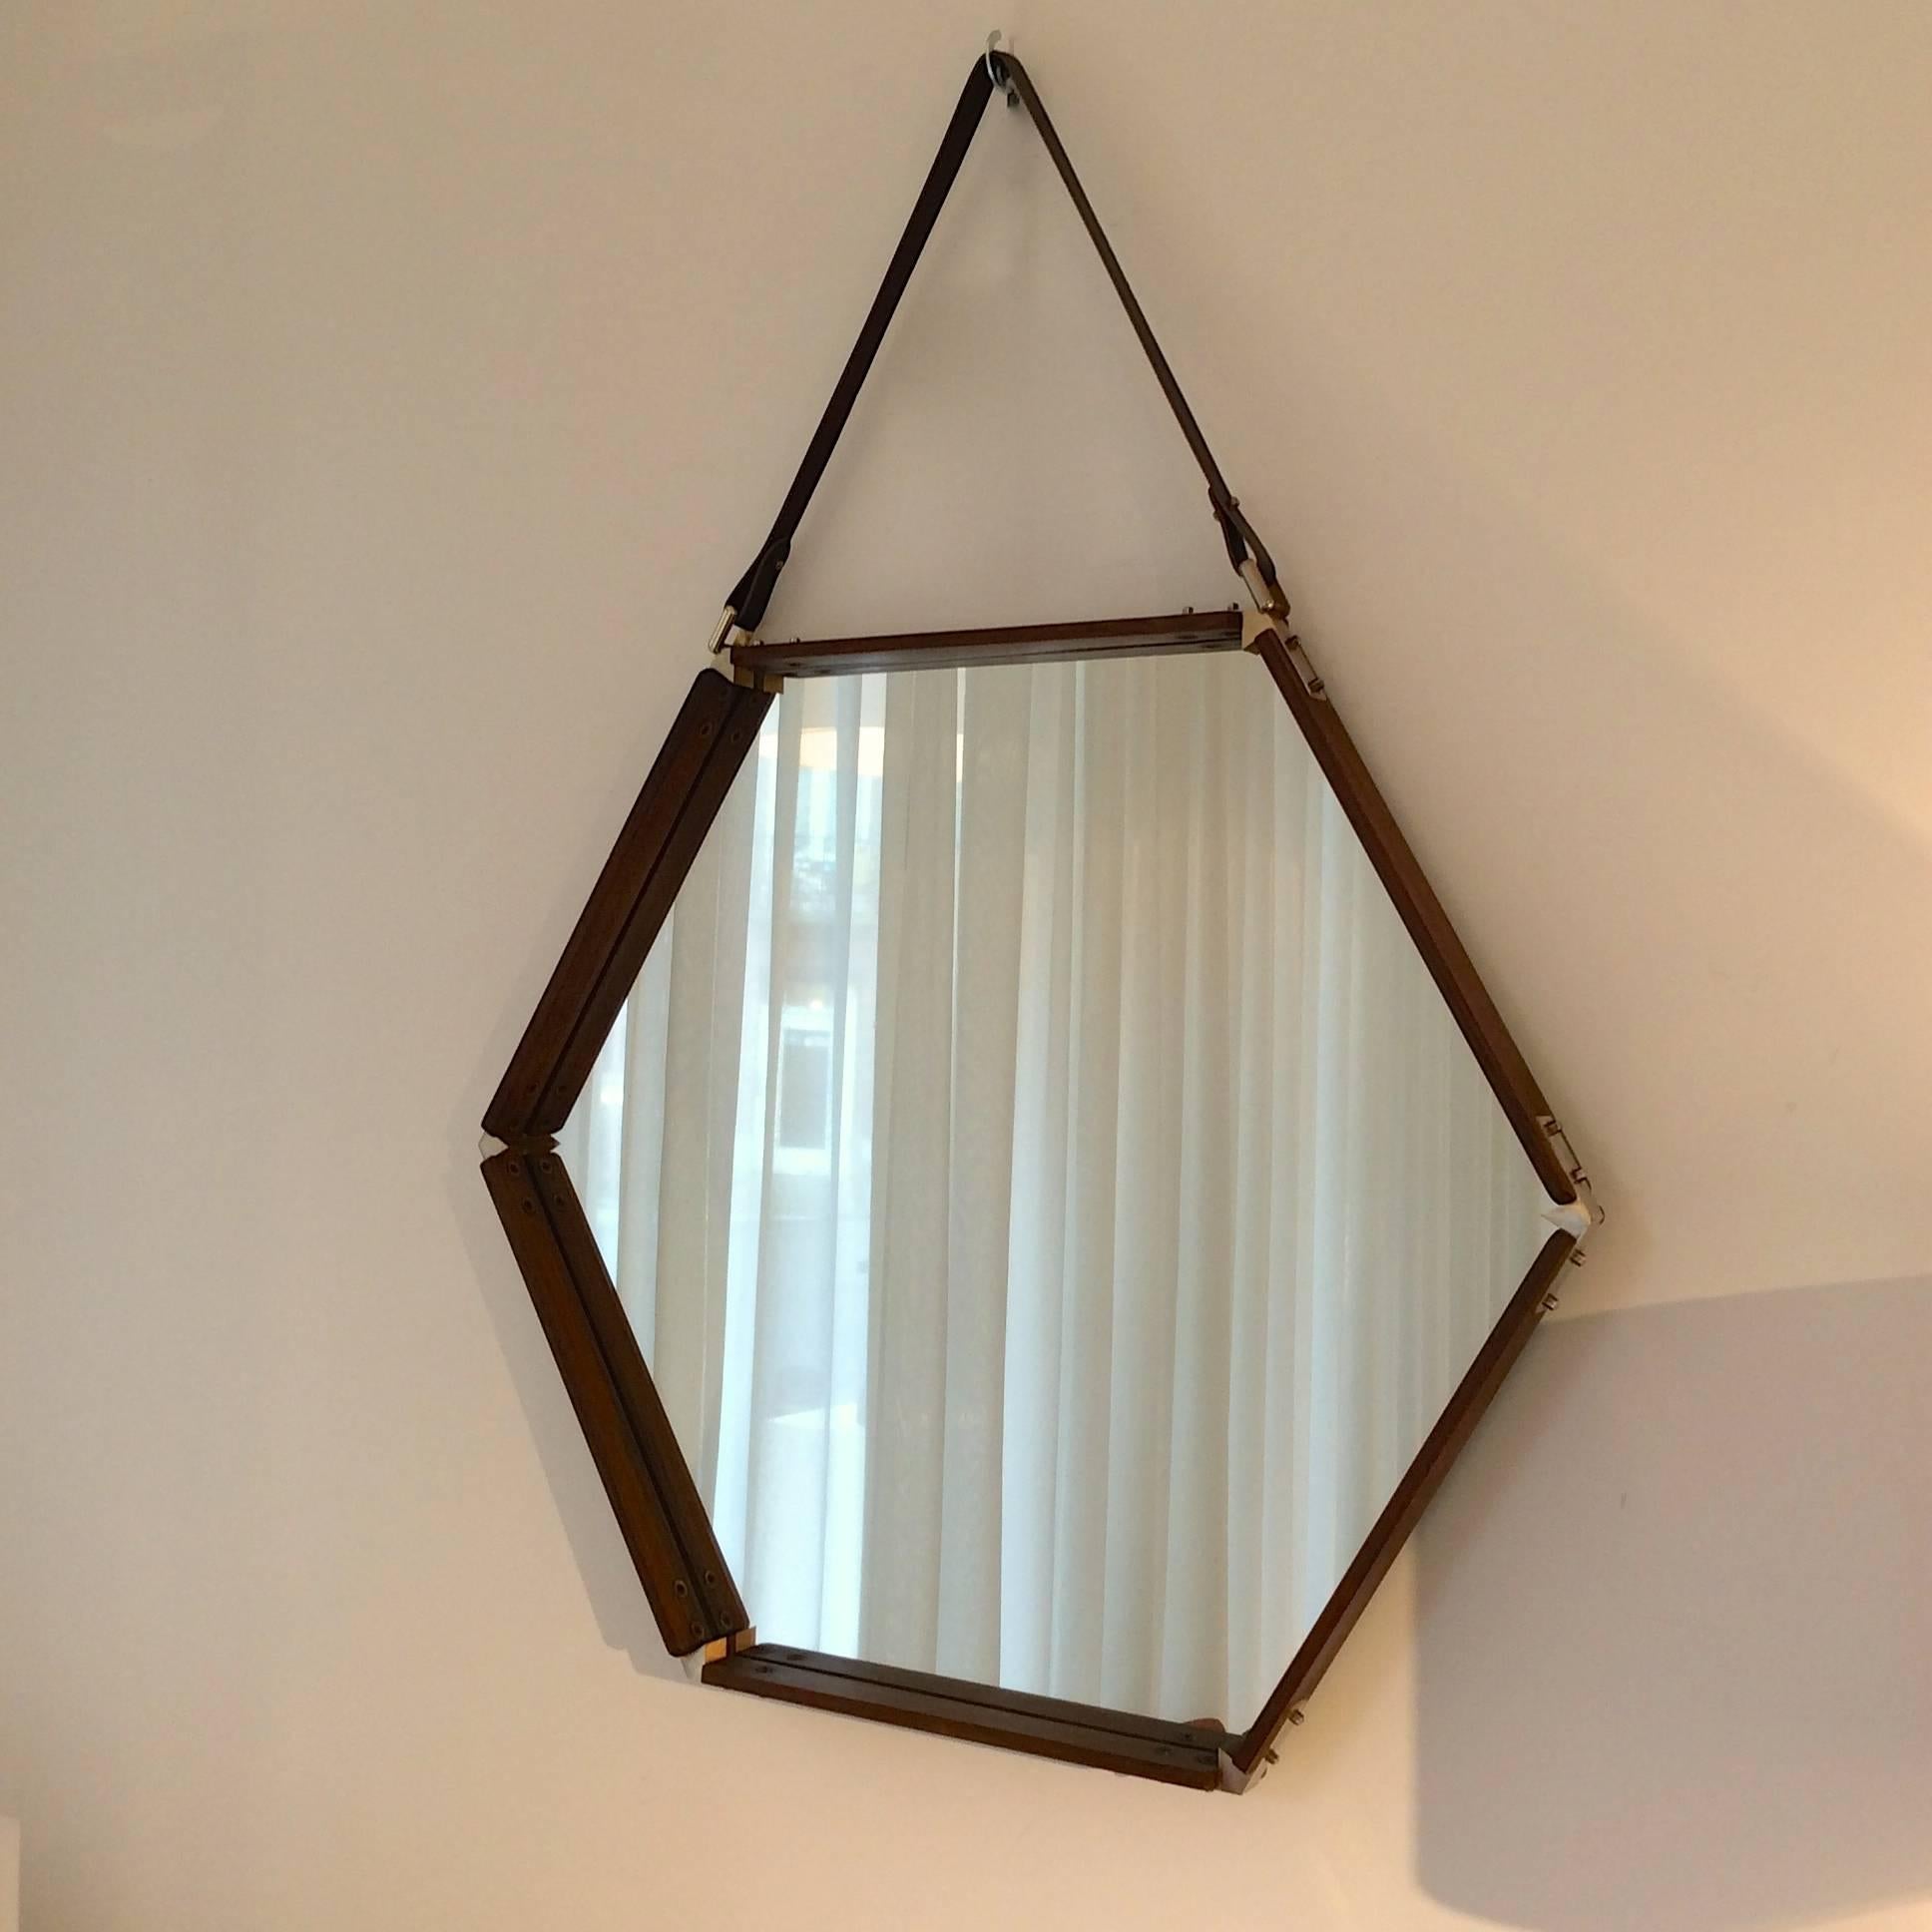 Nice hexagonal mirror, rosewood, brass and brown leather strap,
circa 1960, Italy.
Good condition.
Dimensions: 112 cm H, 84 cm W, 5 cm D.

 

